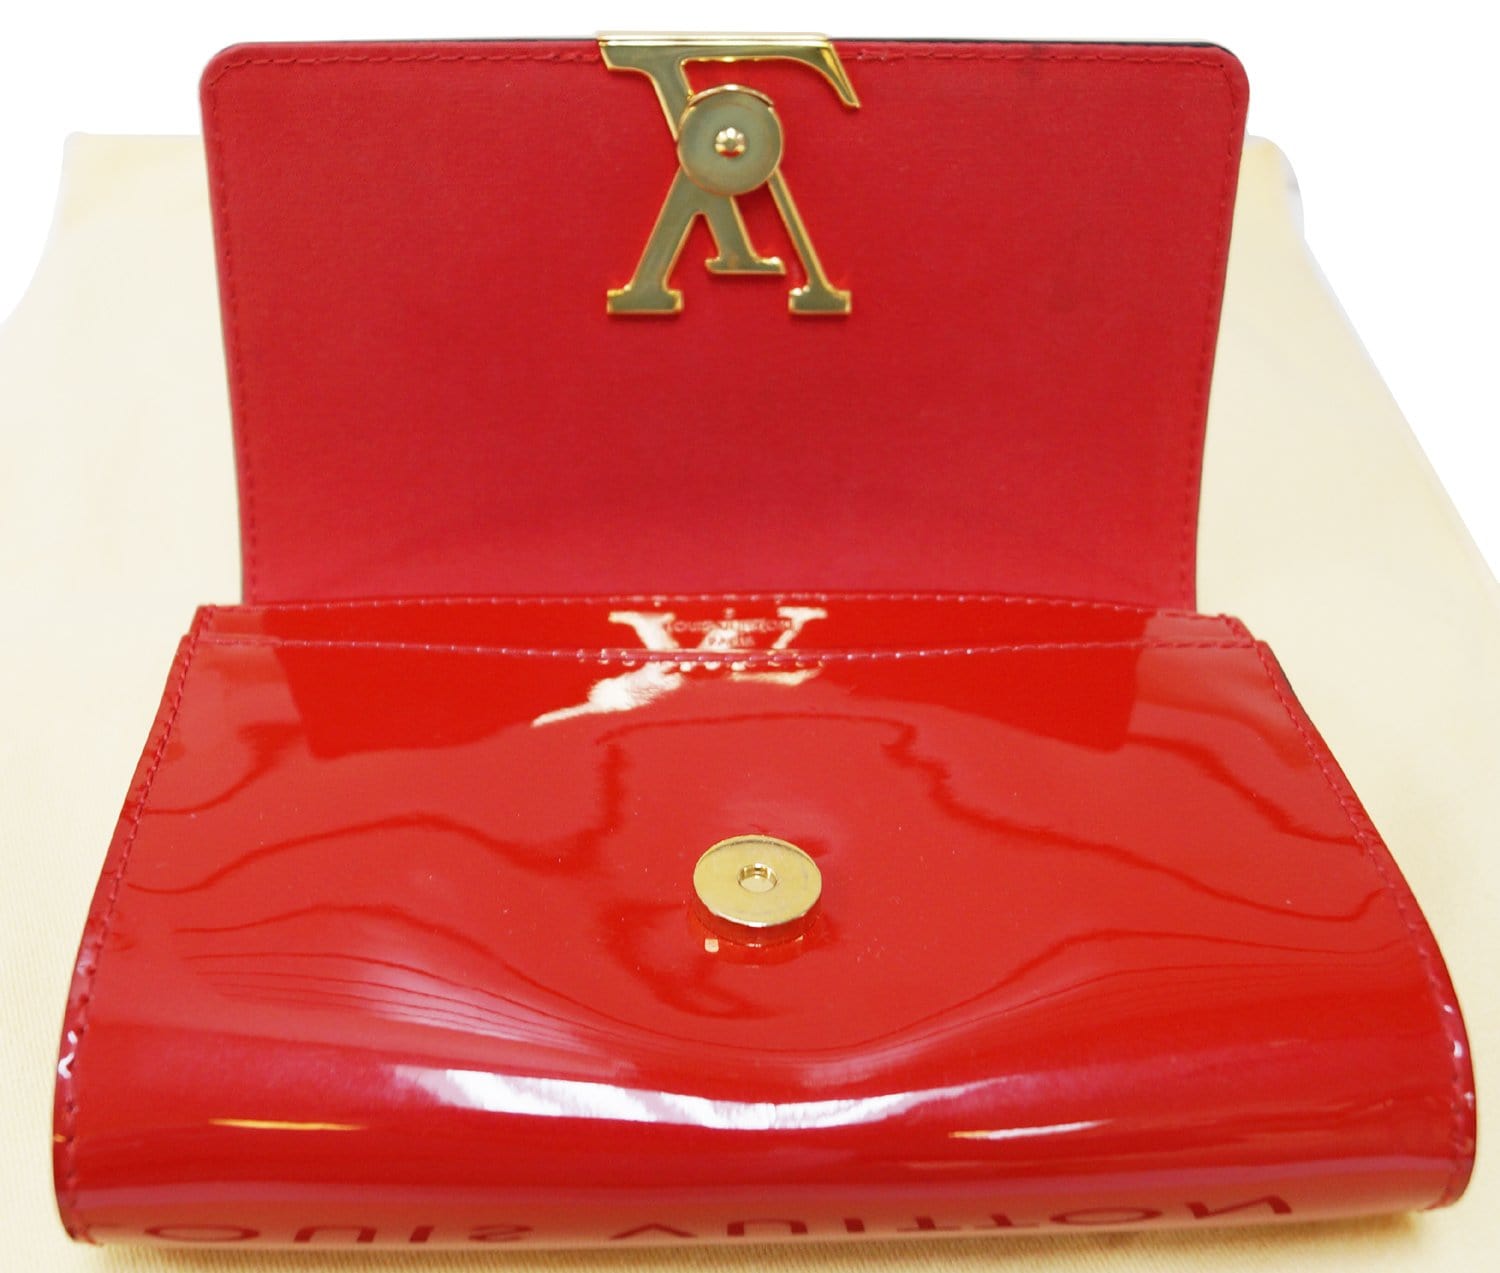 Patent leather bag Louis Vuitton Red in Patent leather - 22125113